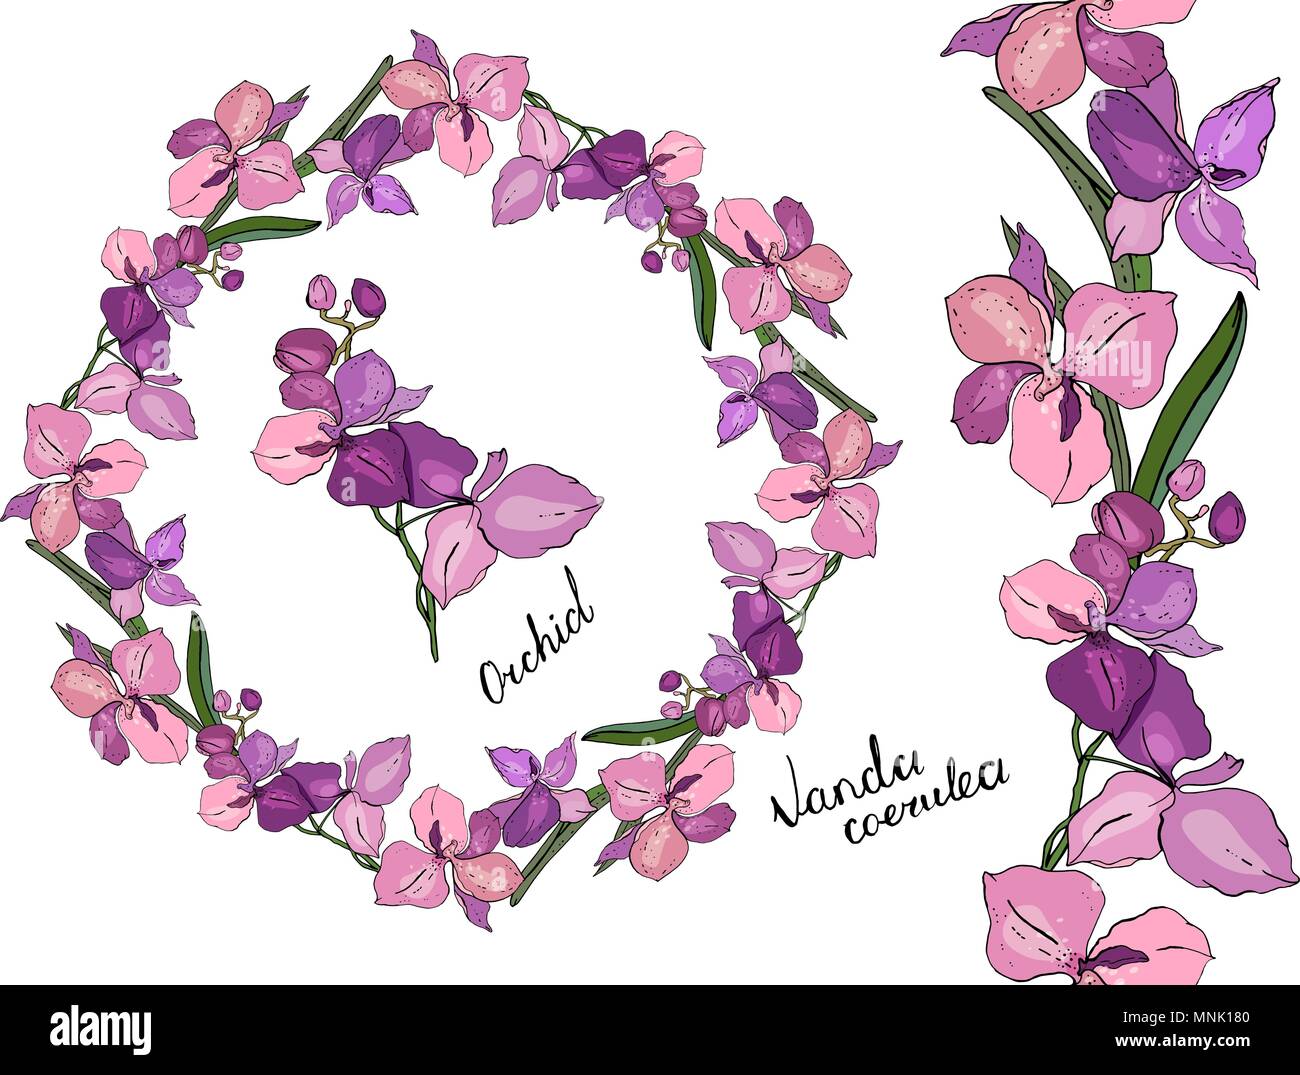 Wreath and vertical endless border made of different orchids. Stock Vector